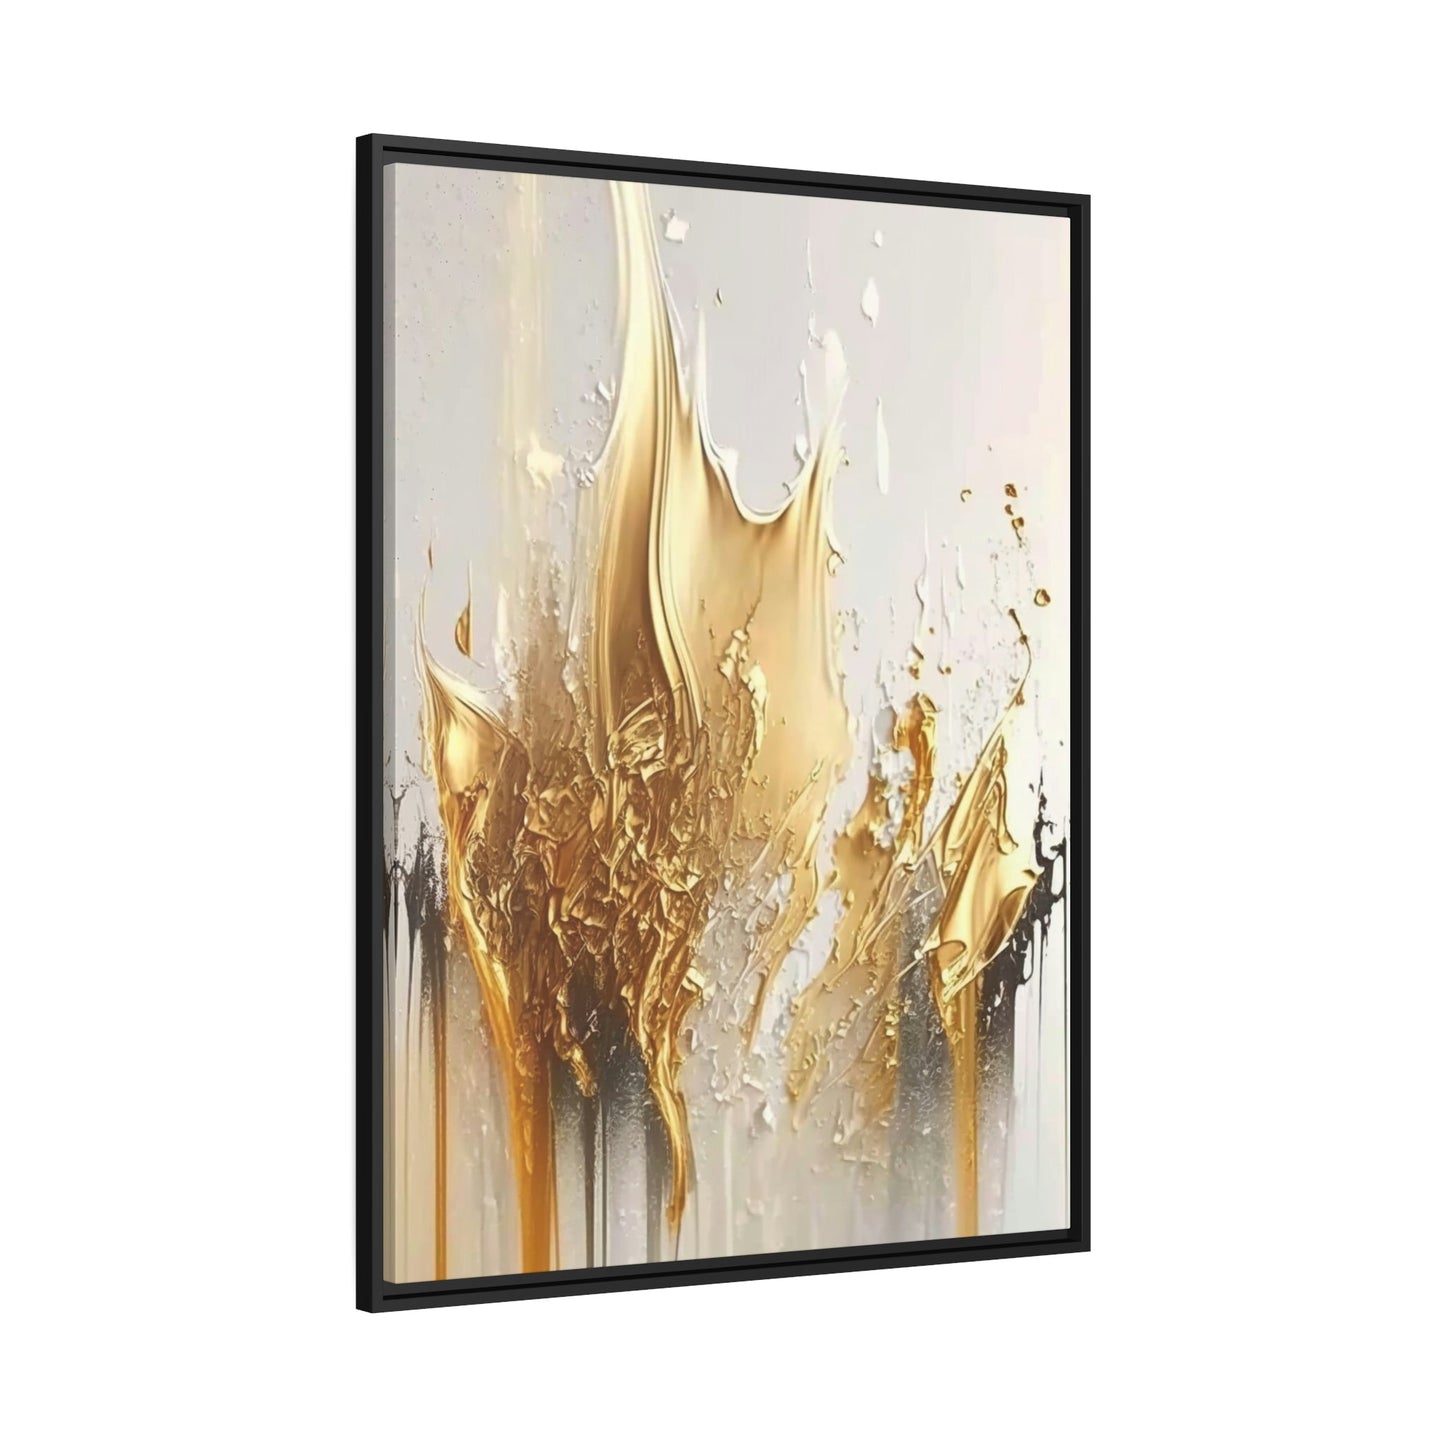 Gilded Beauty: Print on Canvas of a Glamorous and Rich Abstract Art in Gold Hues on Natural Canvas